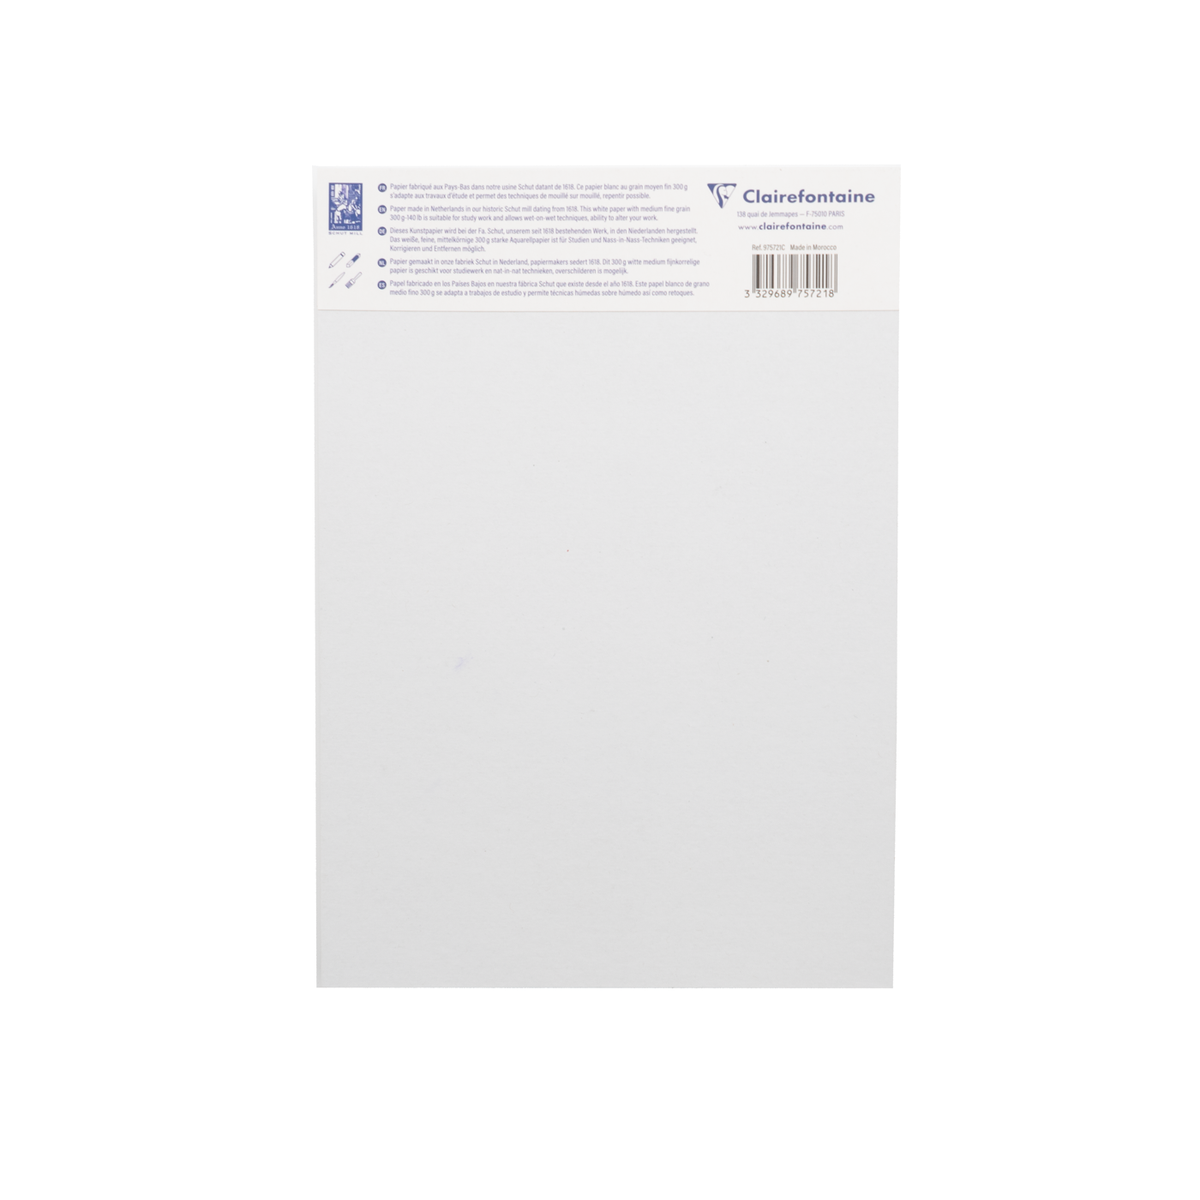 Clairefontaine Fontaine Cold Pressed Watercolour Pad, Wirebound, 300 G, 12 x 18 cm, 12 Sheets